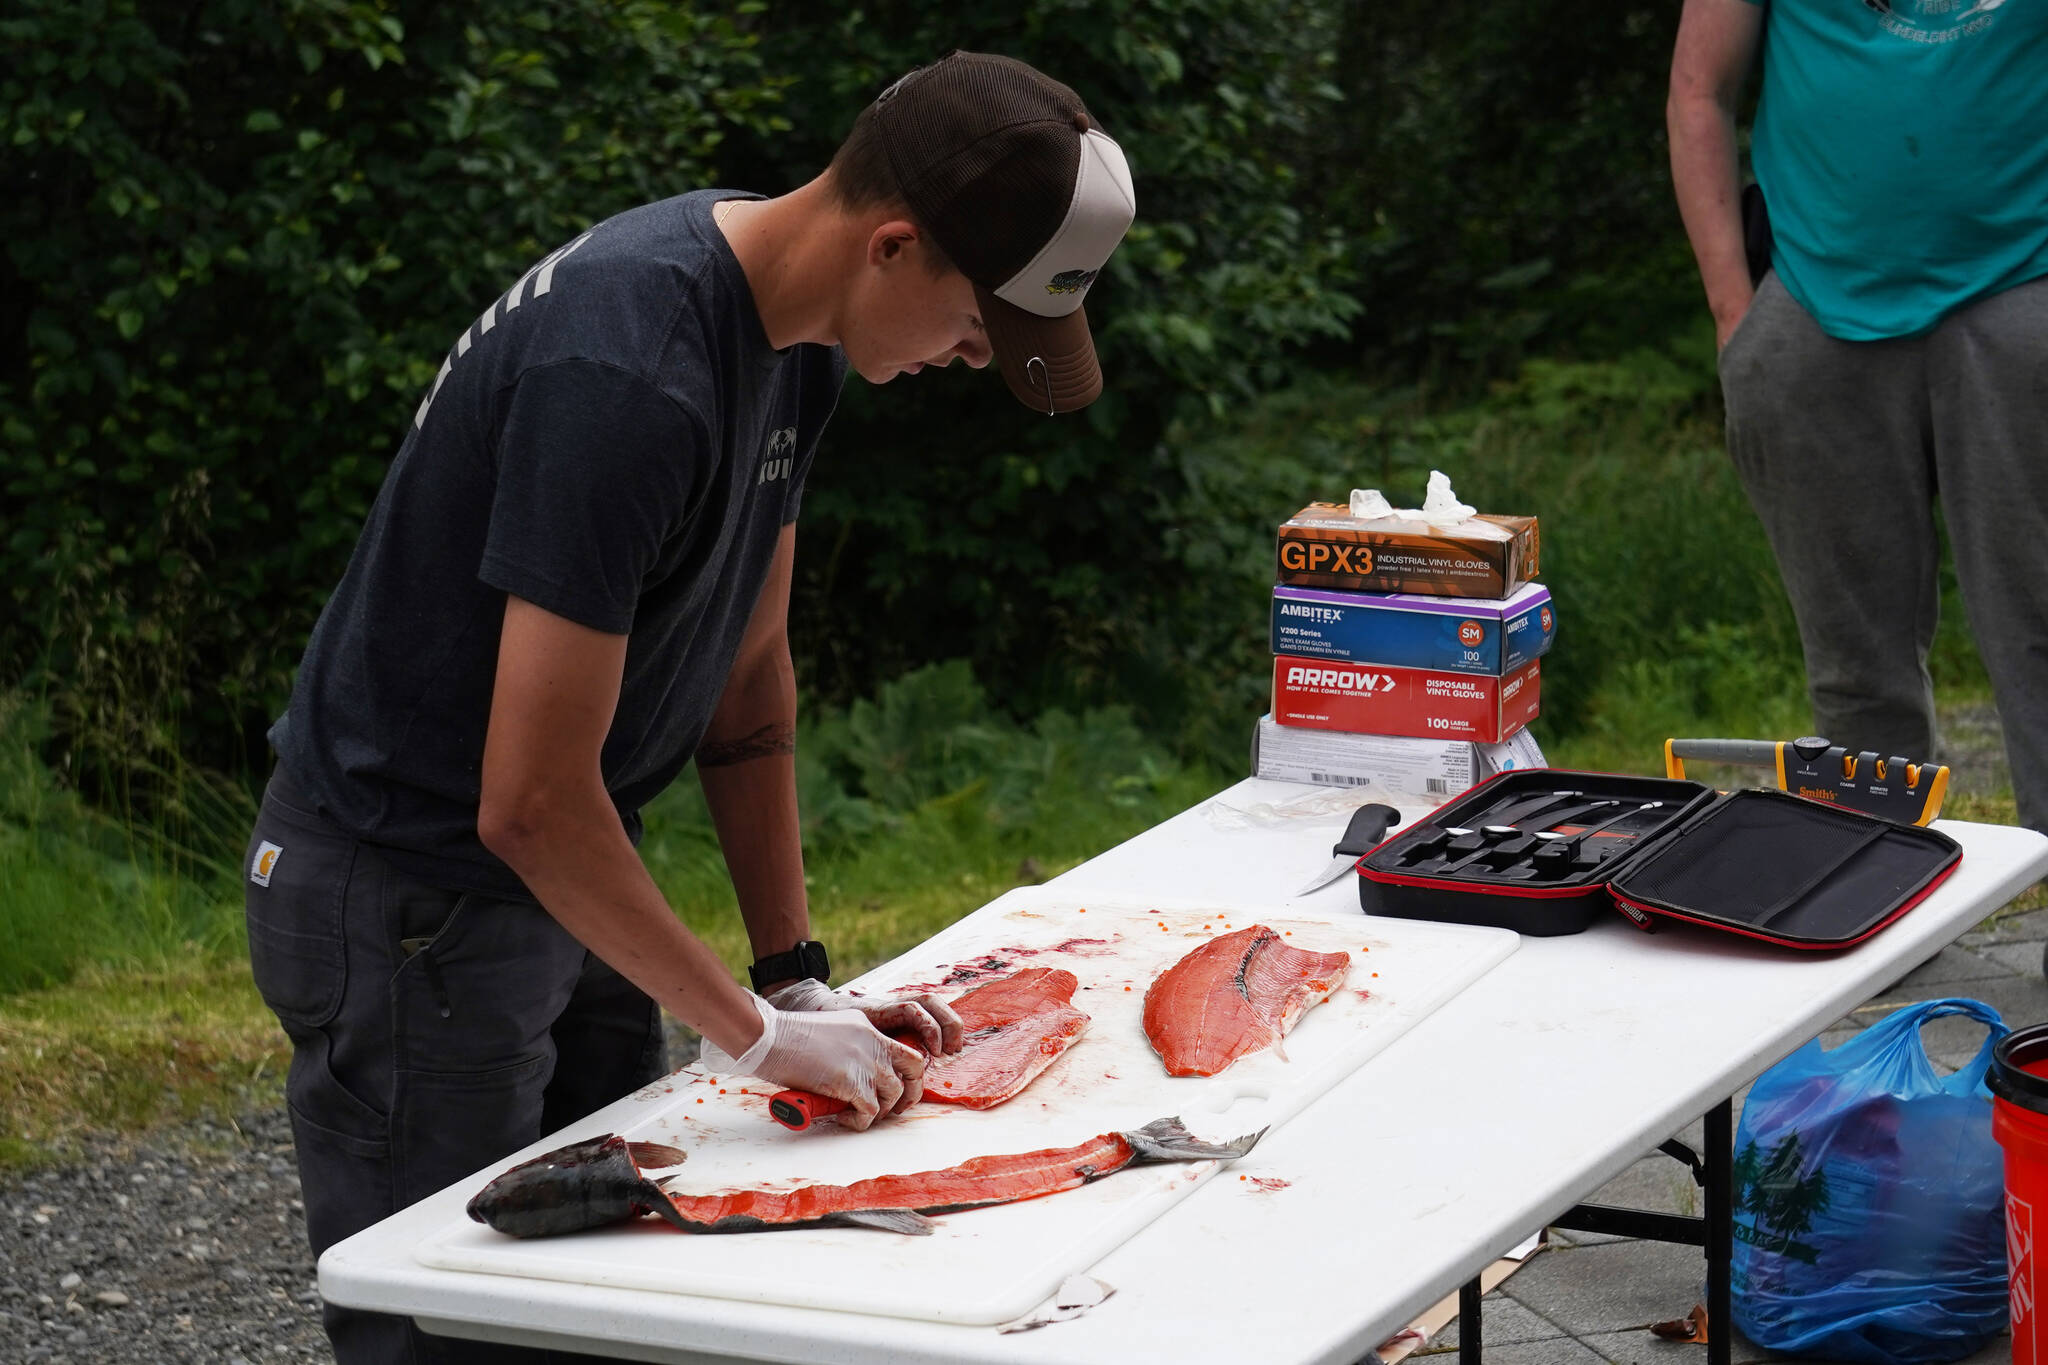 Ransom Hayes fillets a salmon during a smoked salmon demonstration, part of Fish Week 2023, on Wednesday, July 19, 2023, at the Kenai National Wildlife Refuge Visitor Center in Soldotna, Alaska. (Jake Dye/Peninsula Clarion)